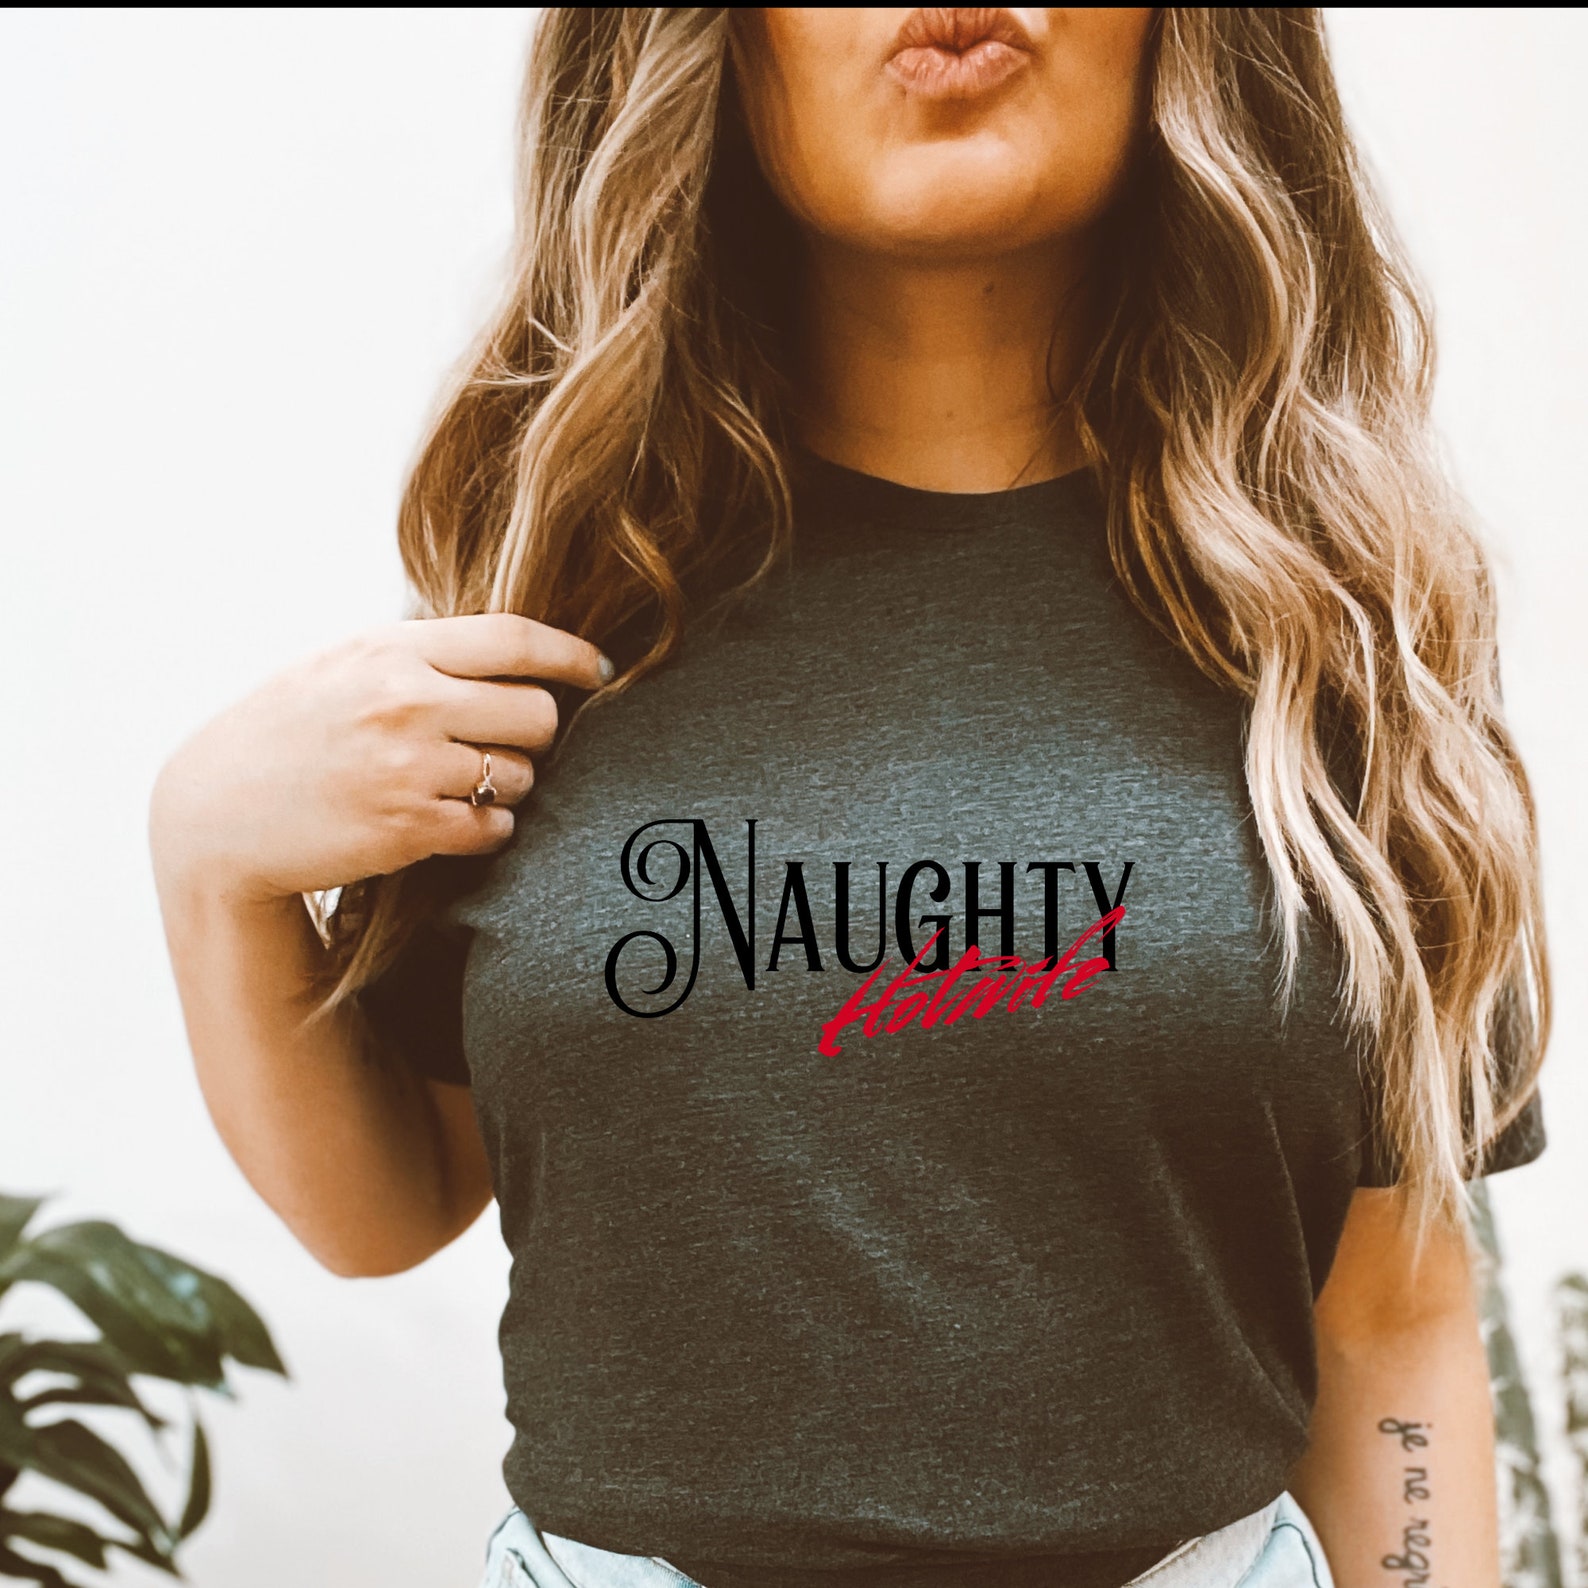 Naughty Hotwife T Shirt Hot Wife Sexy Ts For Him Horny Get Etsy